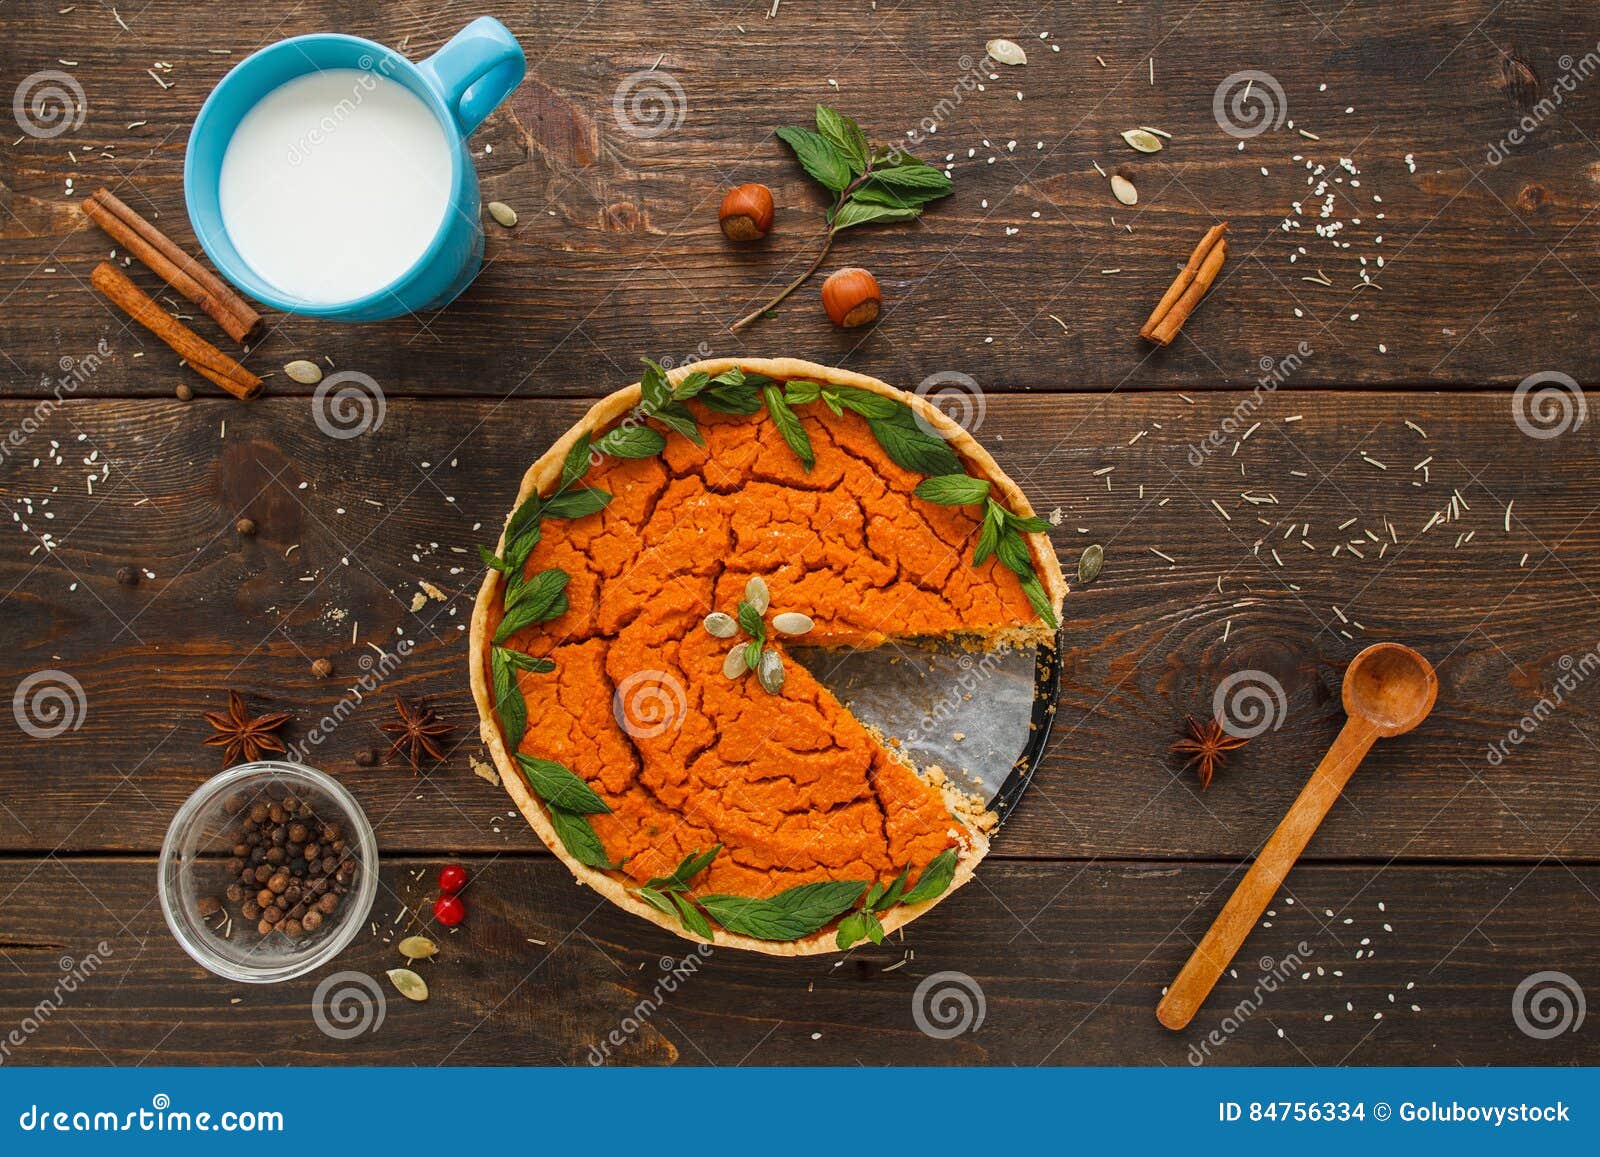 pumpkin-pie-with-cup-of-milk-flat-lay-stock-photo-image-of-festive